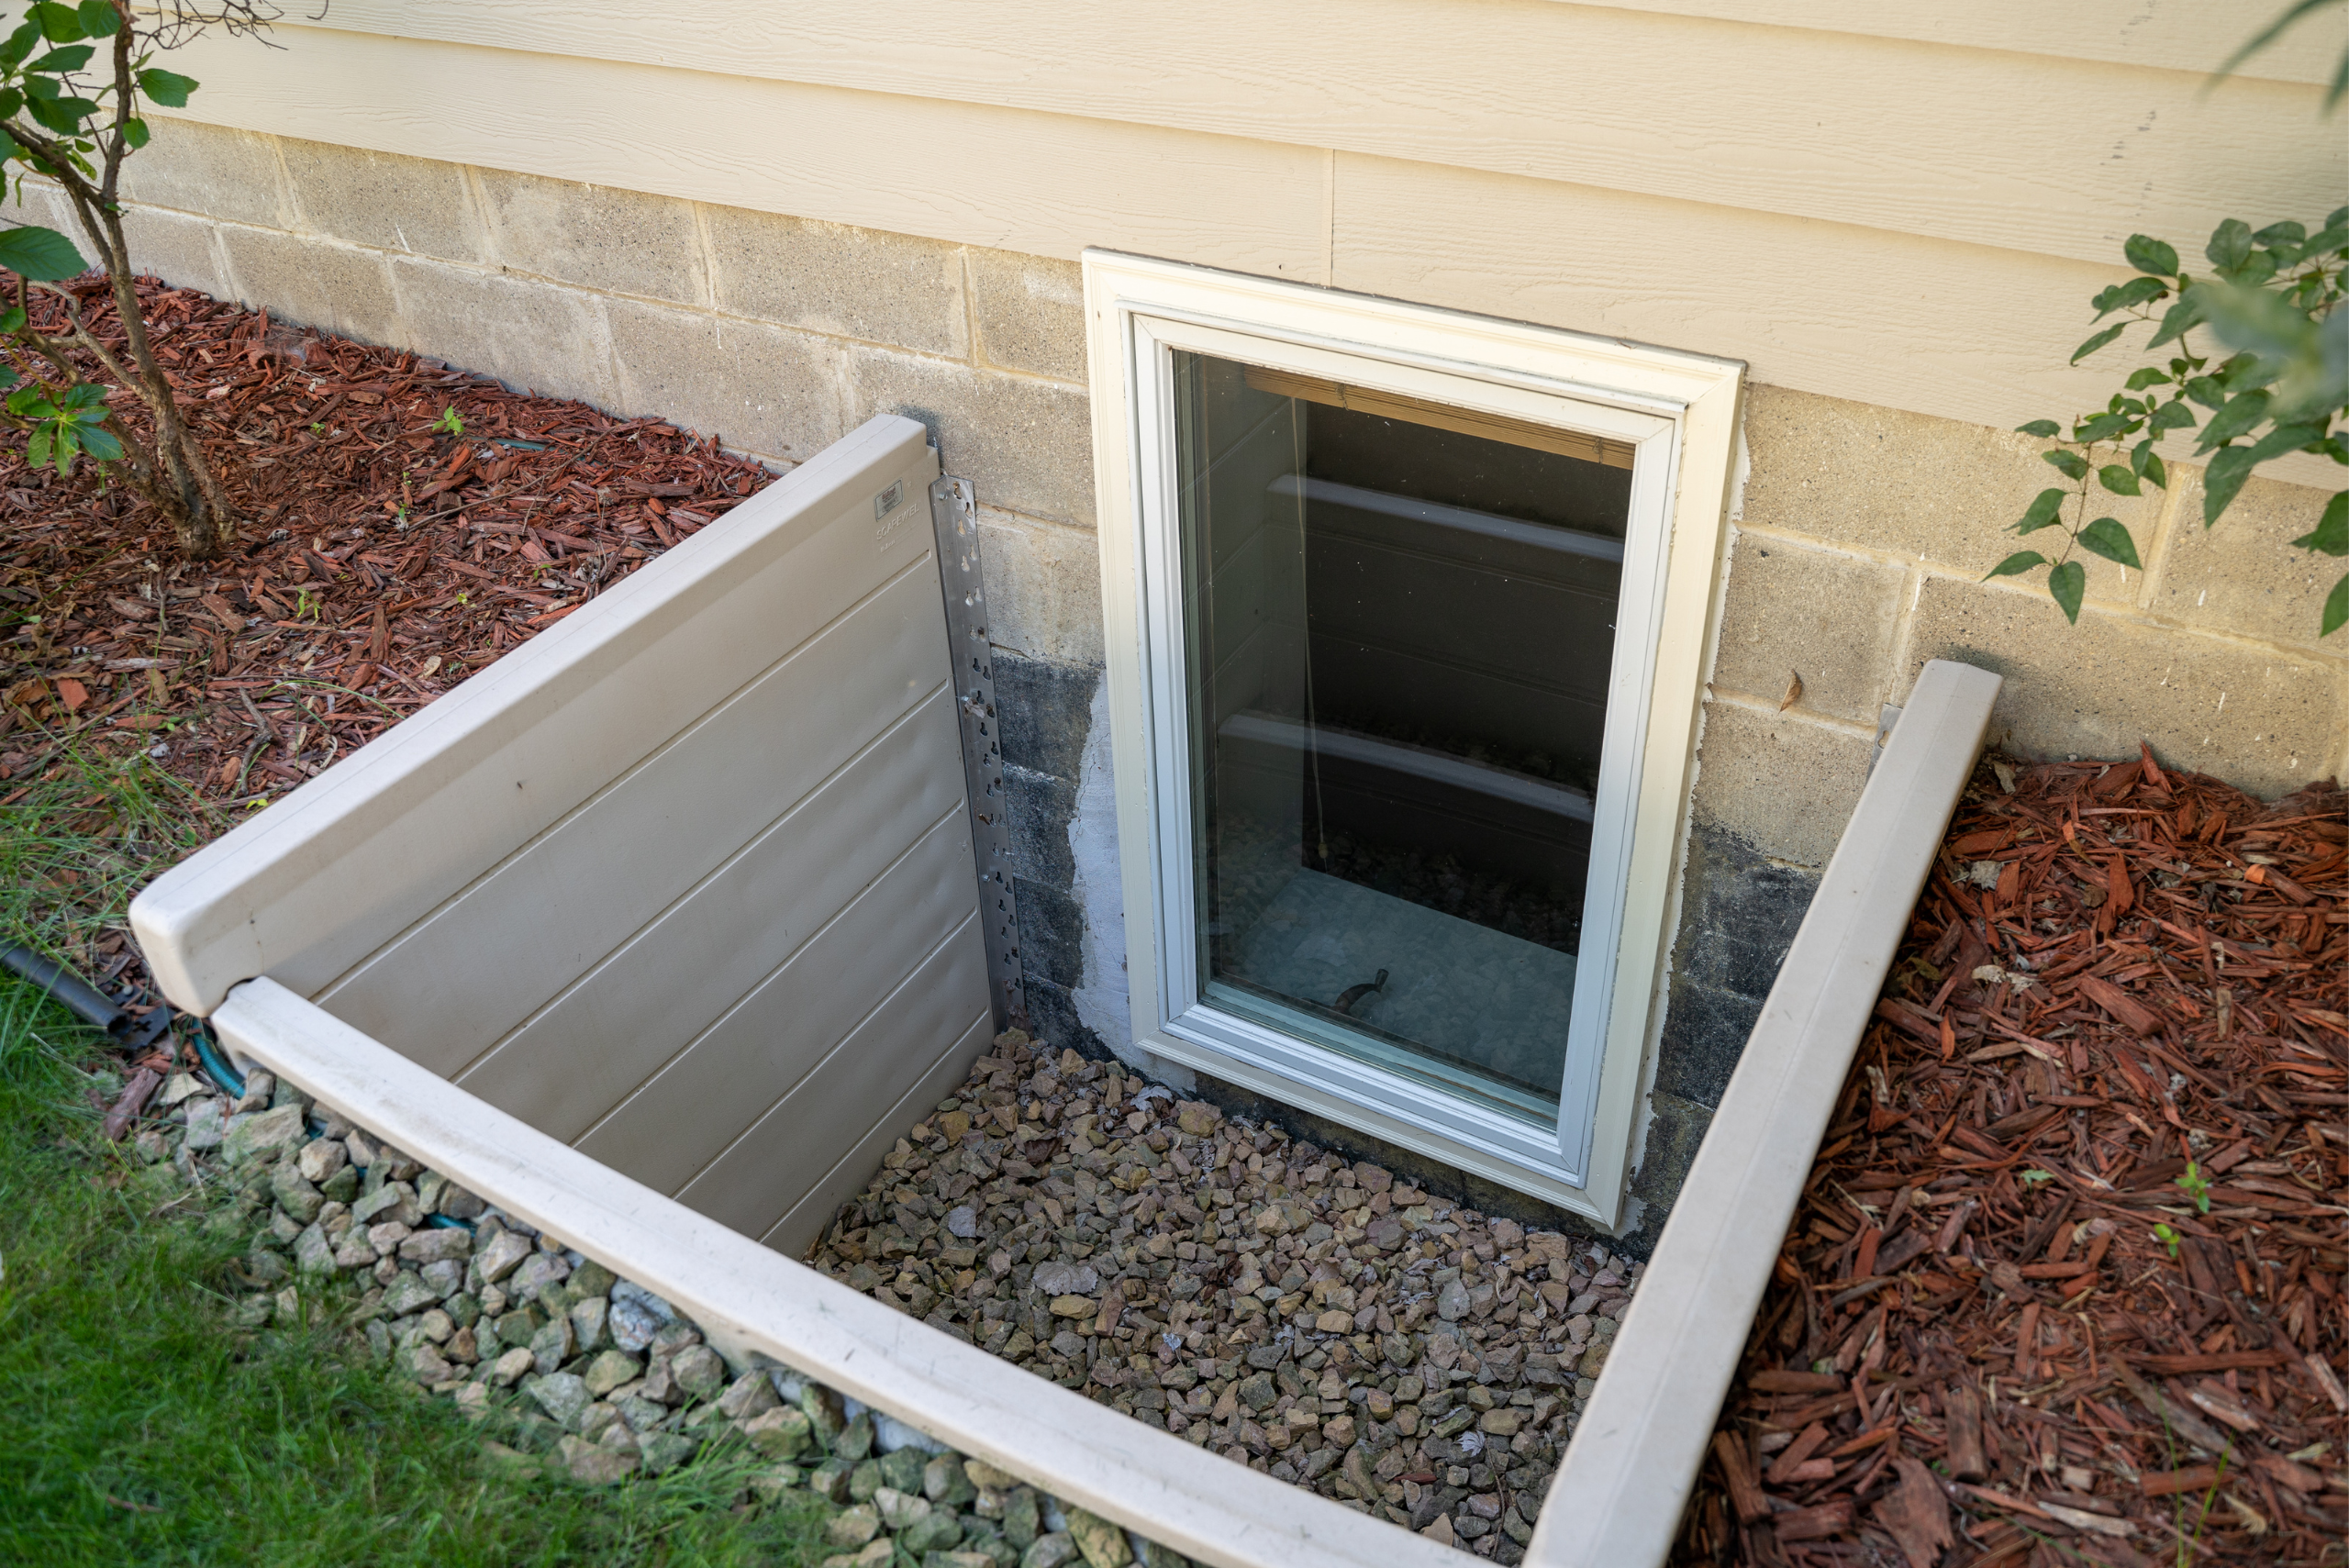 A basement window with dug out space for emergencies.